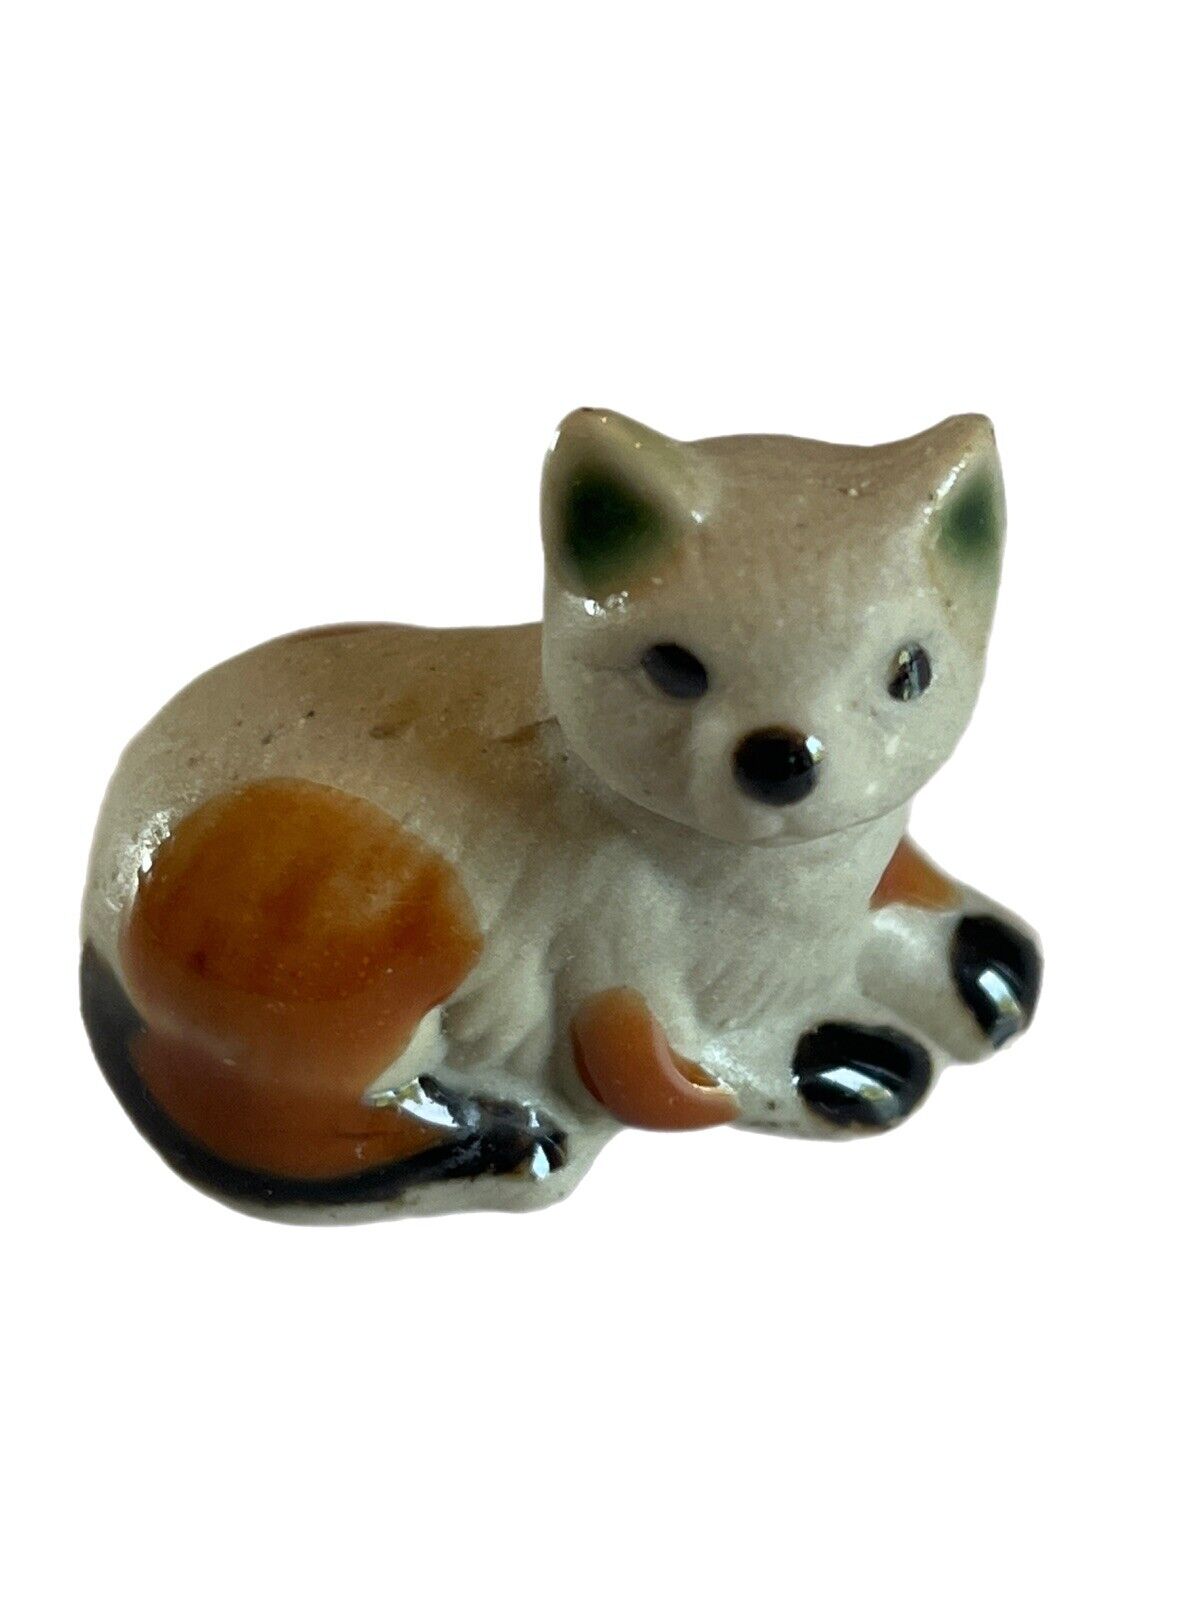 Vintage Miniature Bisque and High Gloss Ceramic Calico Kitten Kitty Cat Figurine